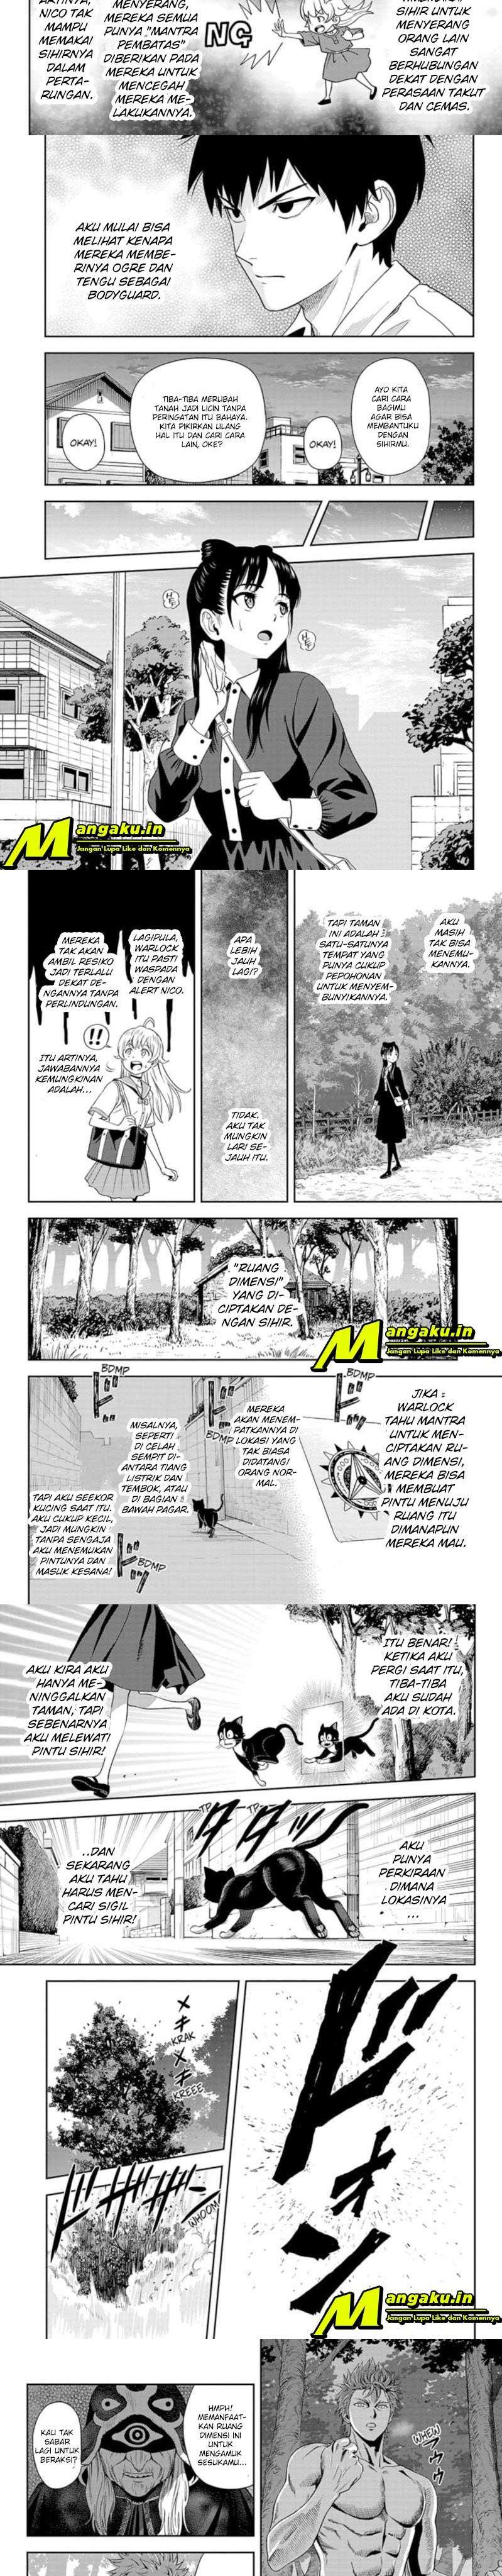 Witch Watch Chapter 24 4